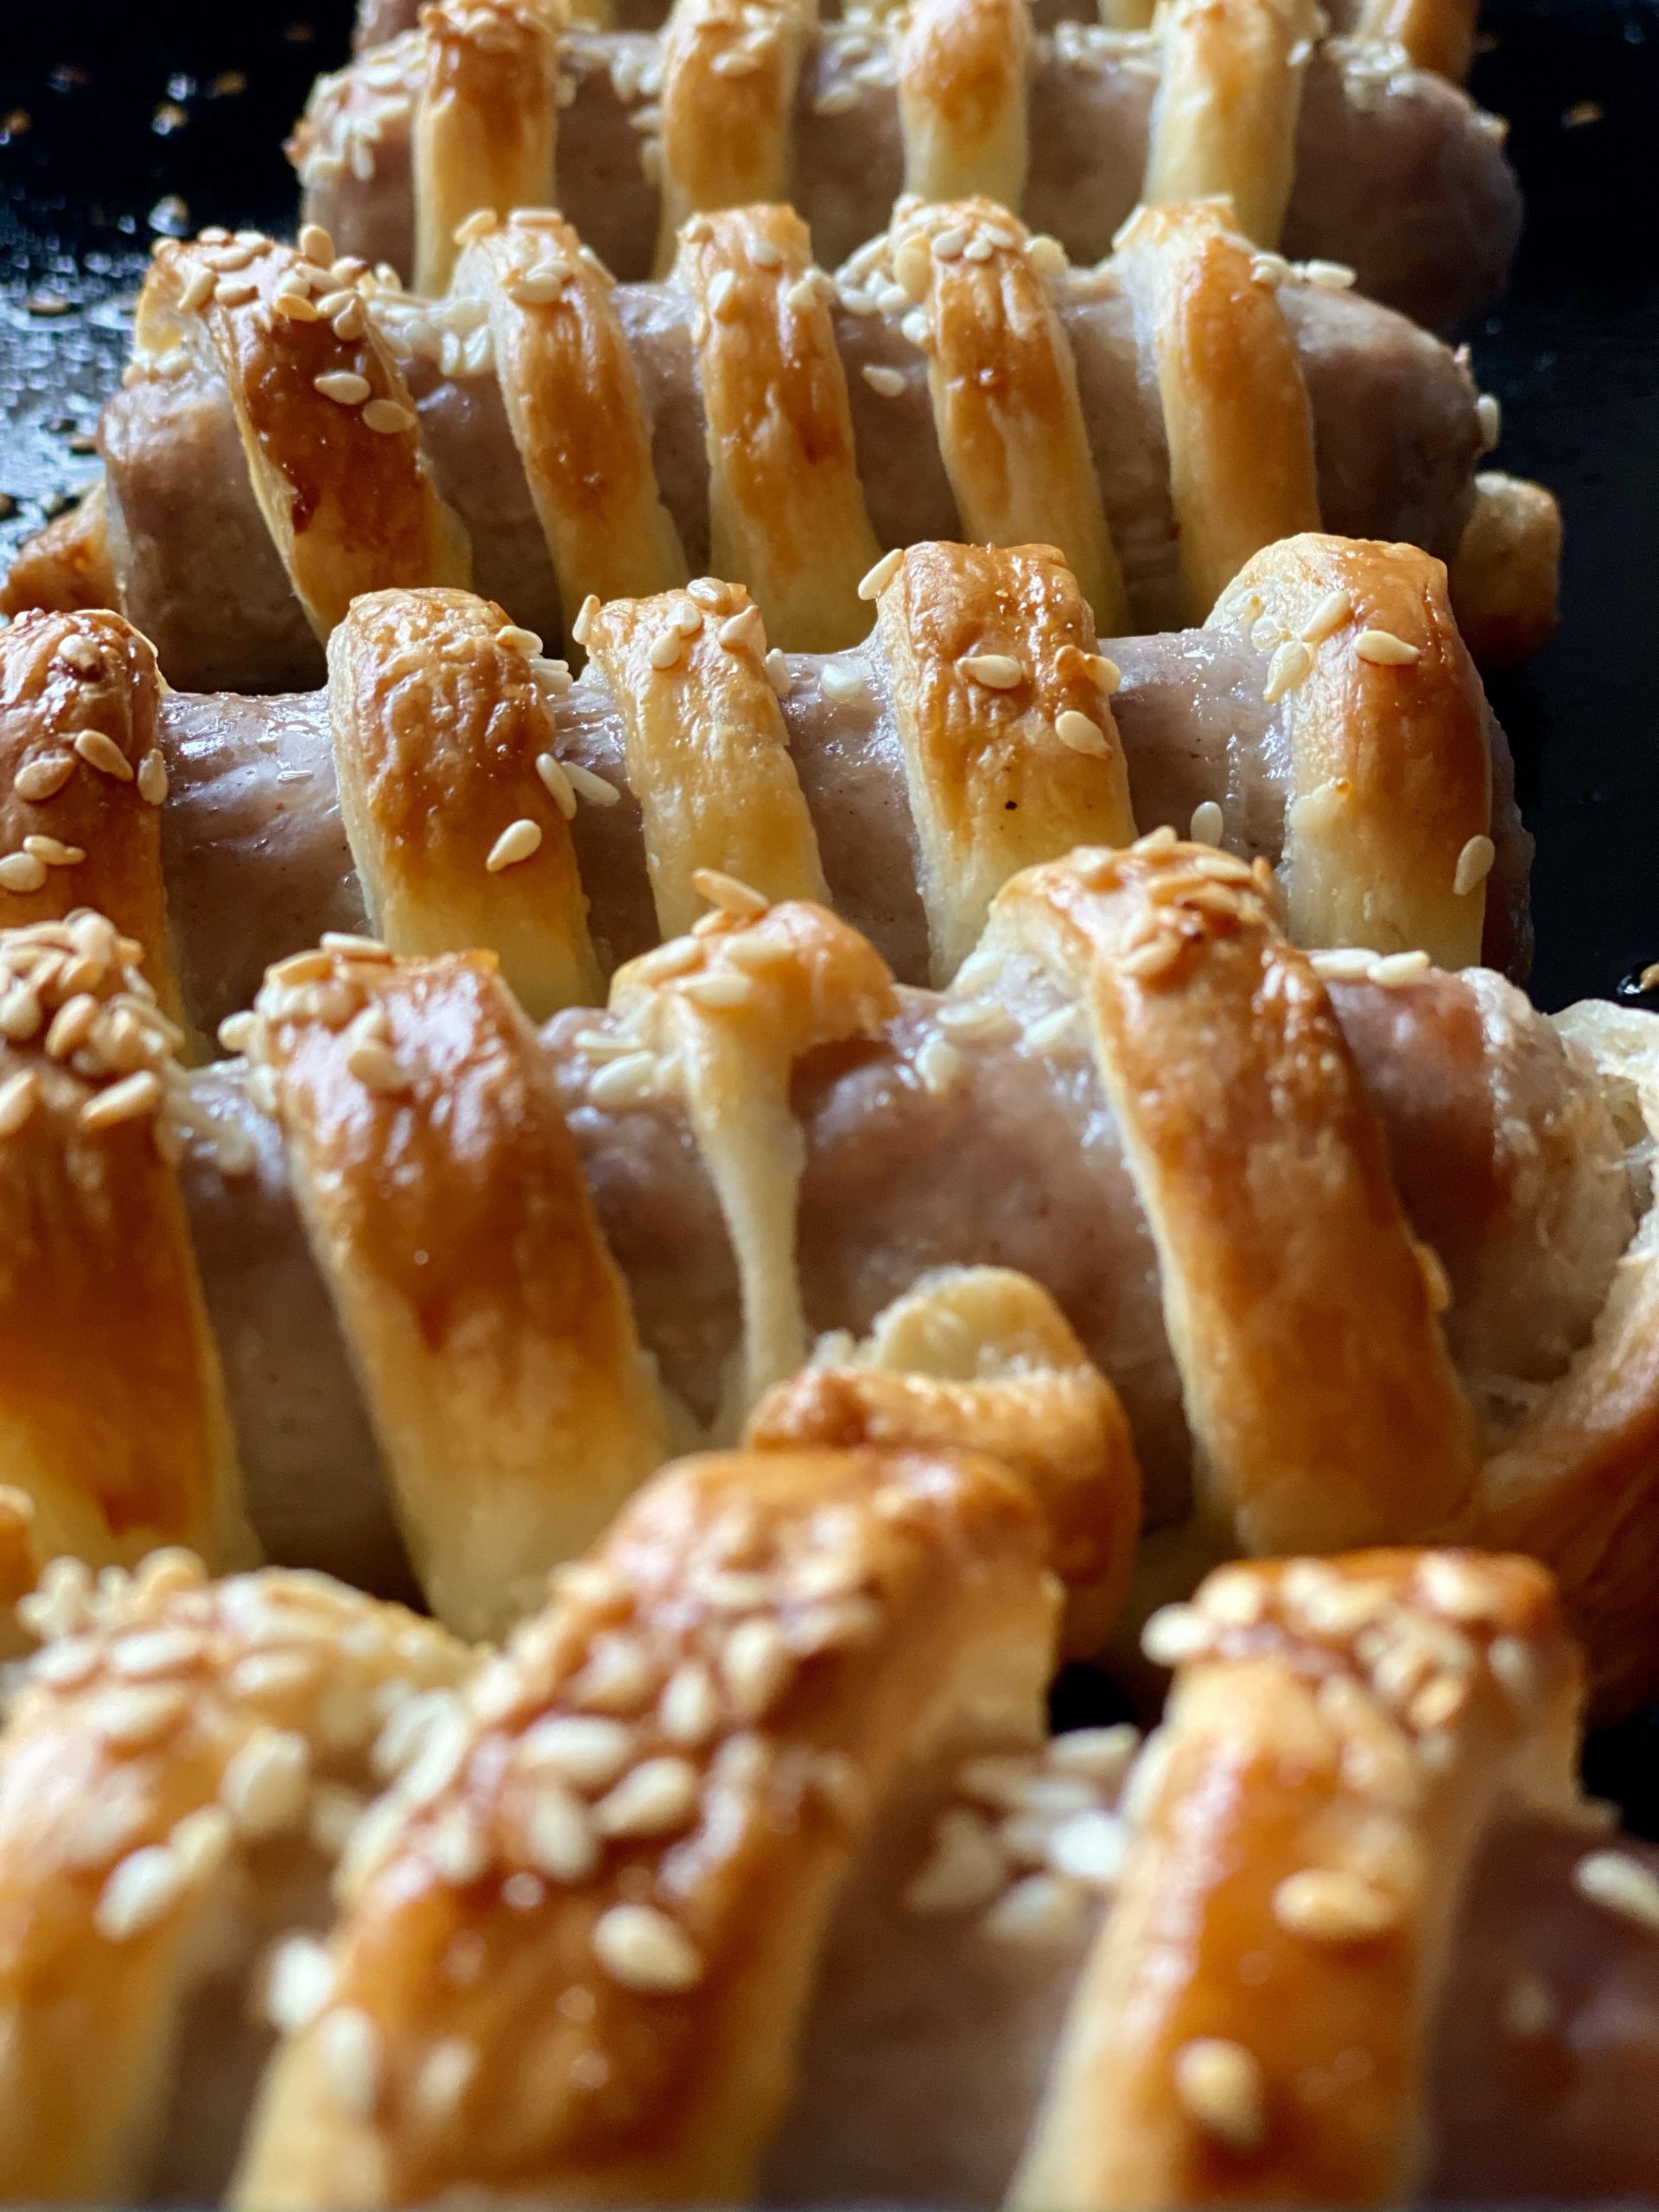 Pigs In Puff Pastry Blankets - A wonderful Party Canapé